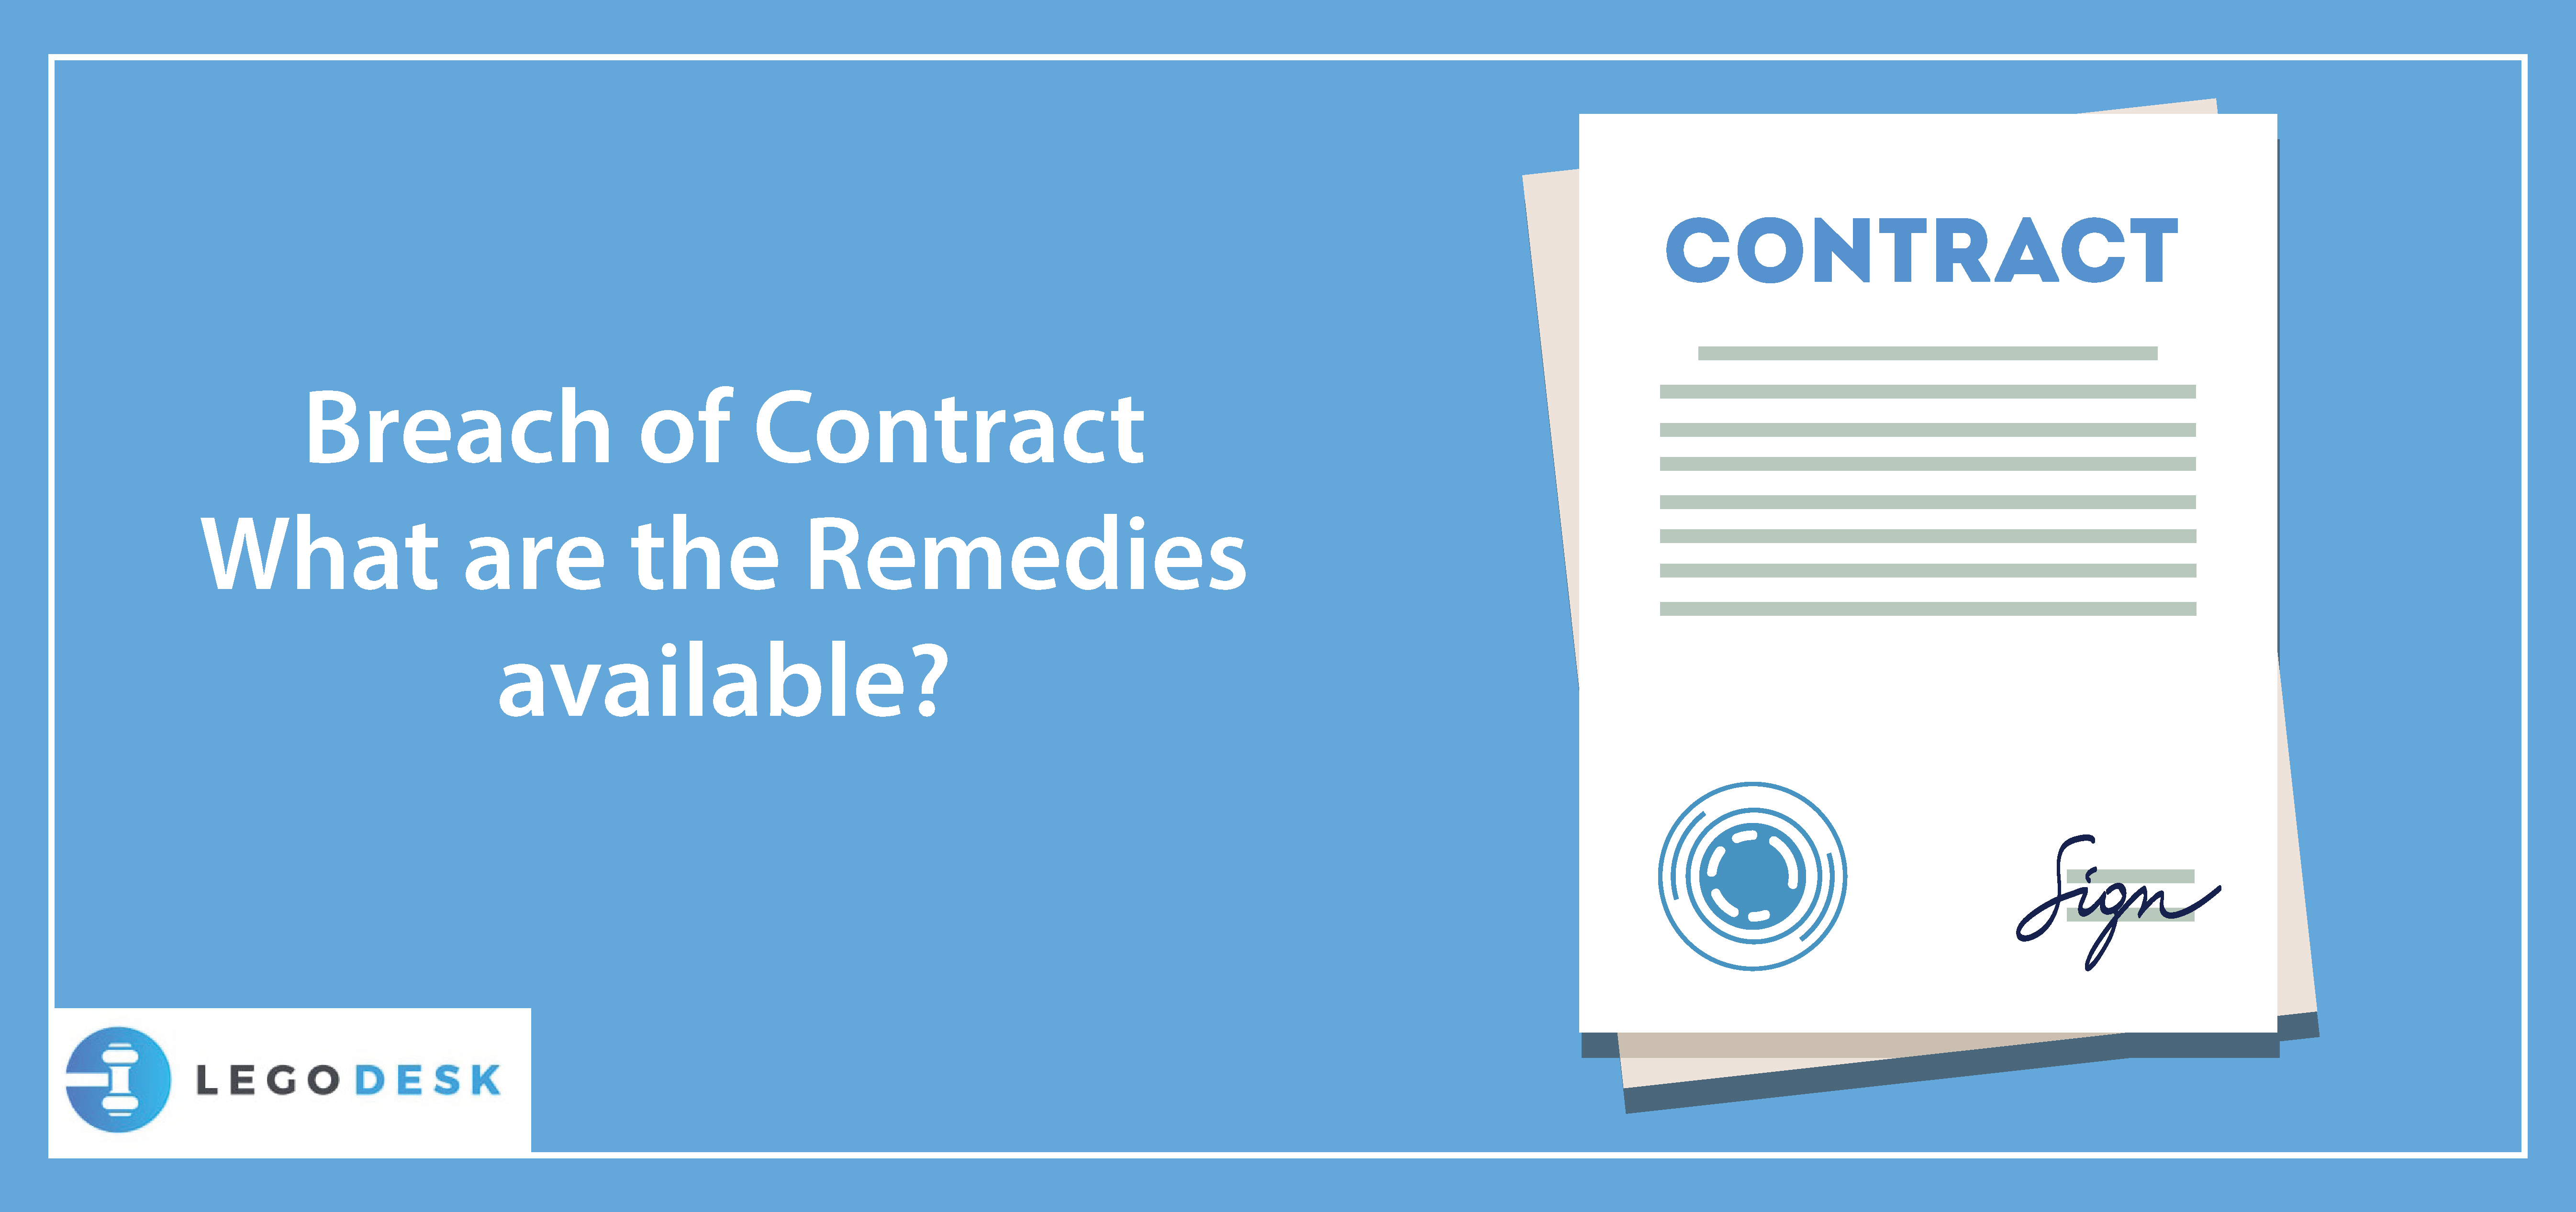 What are the Remedies for Breach of Contract?